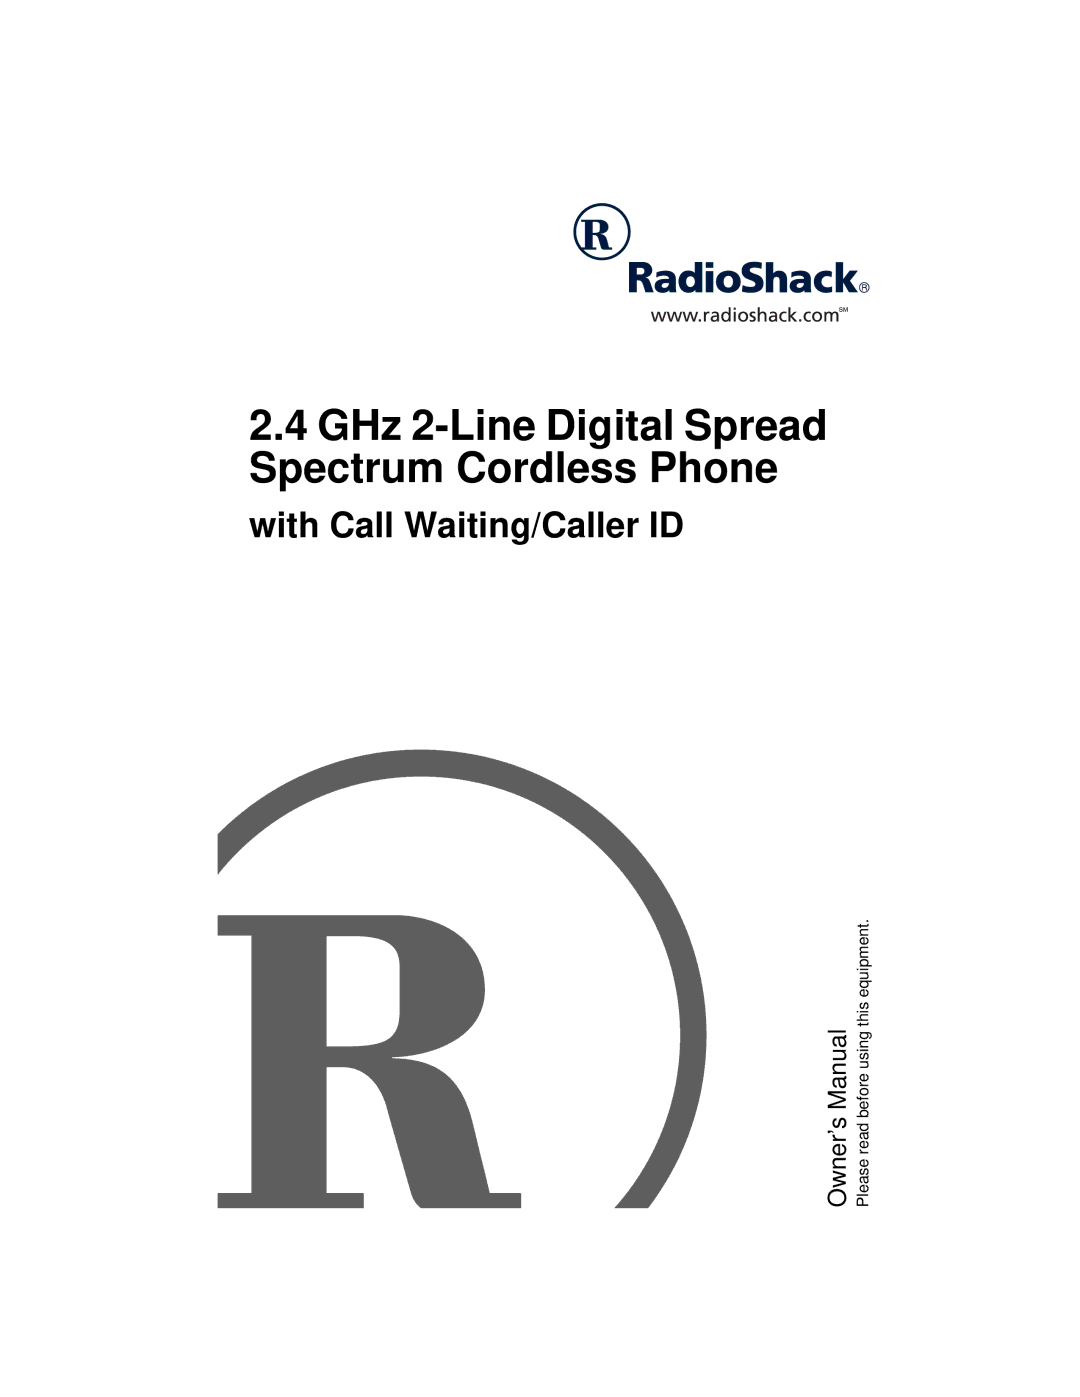 Radio Shack 2.4 GHz 2-Line Digital Spread Spectrum Cordless Phone with Call Waiting/Caller ID owner manual 